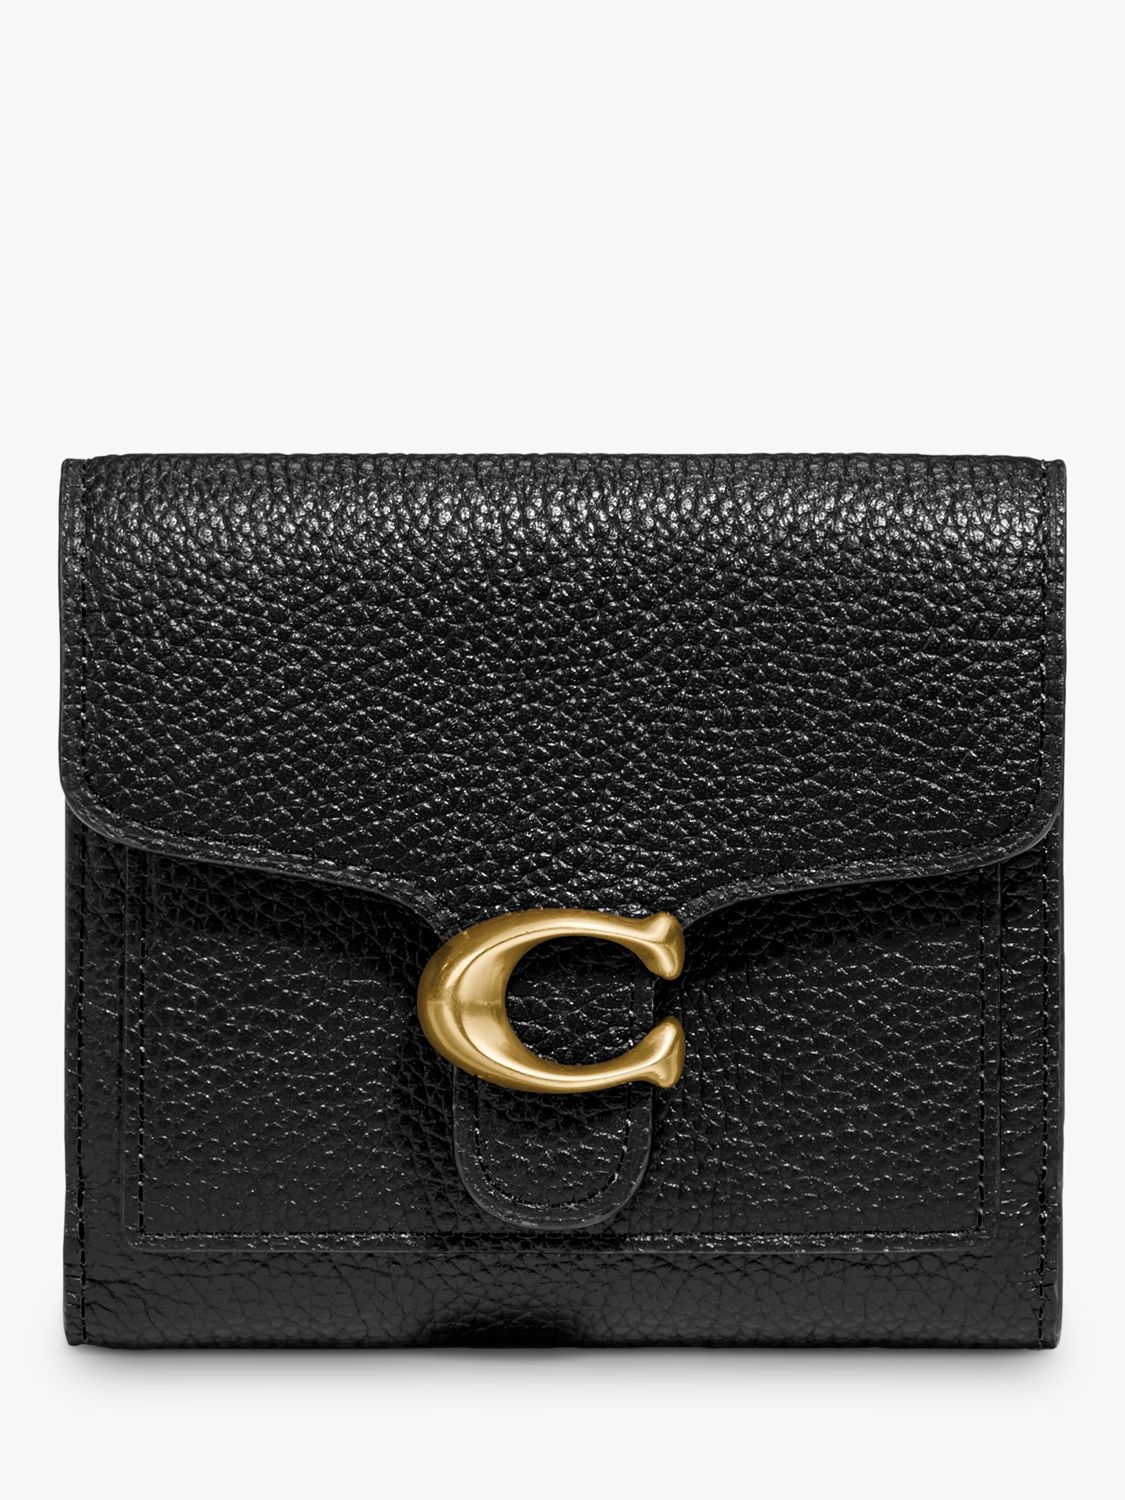 Coach Tabby Leather Small Wallet, Black at John Lewis & Partners